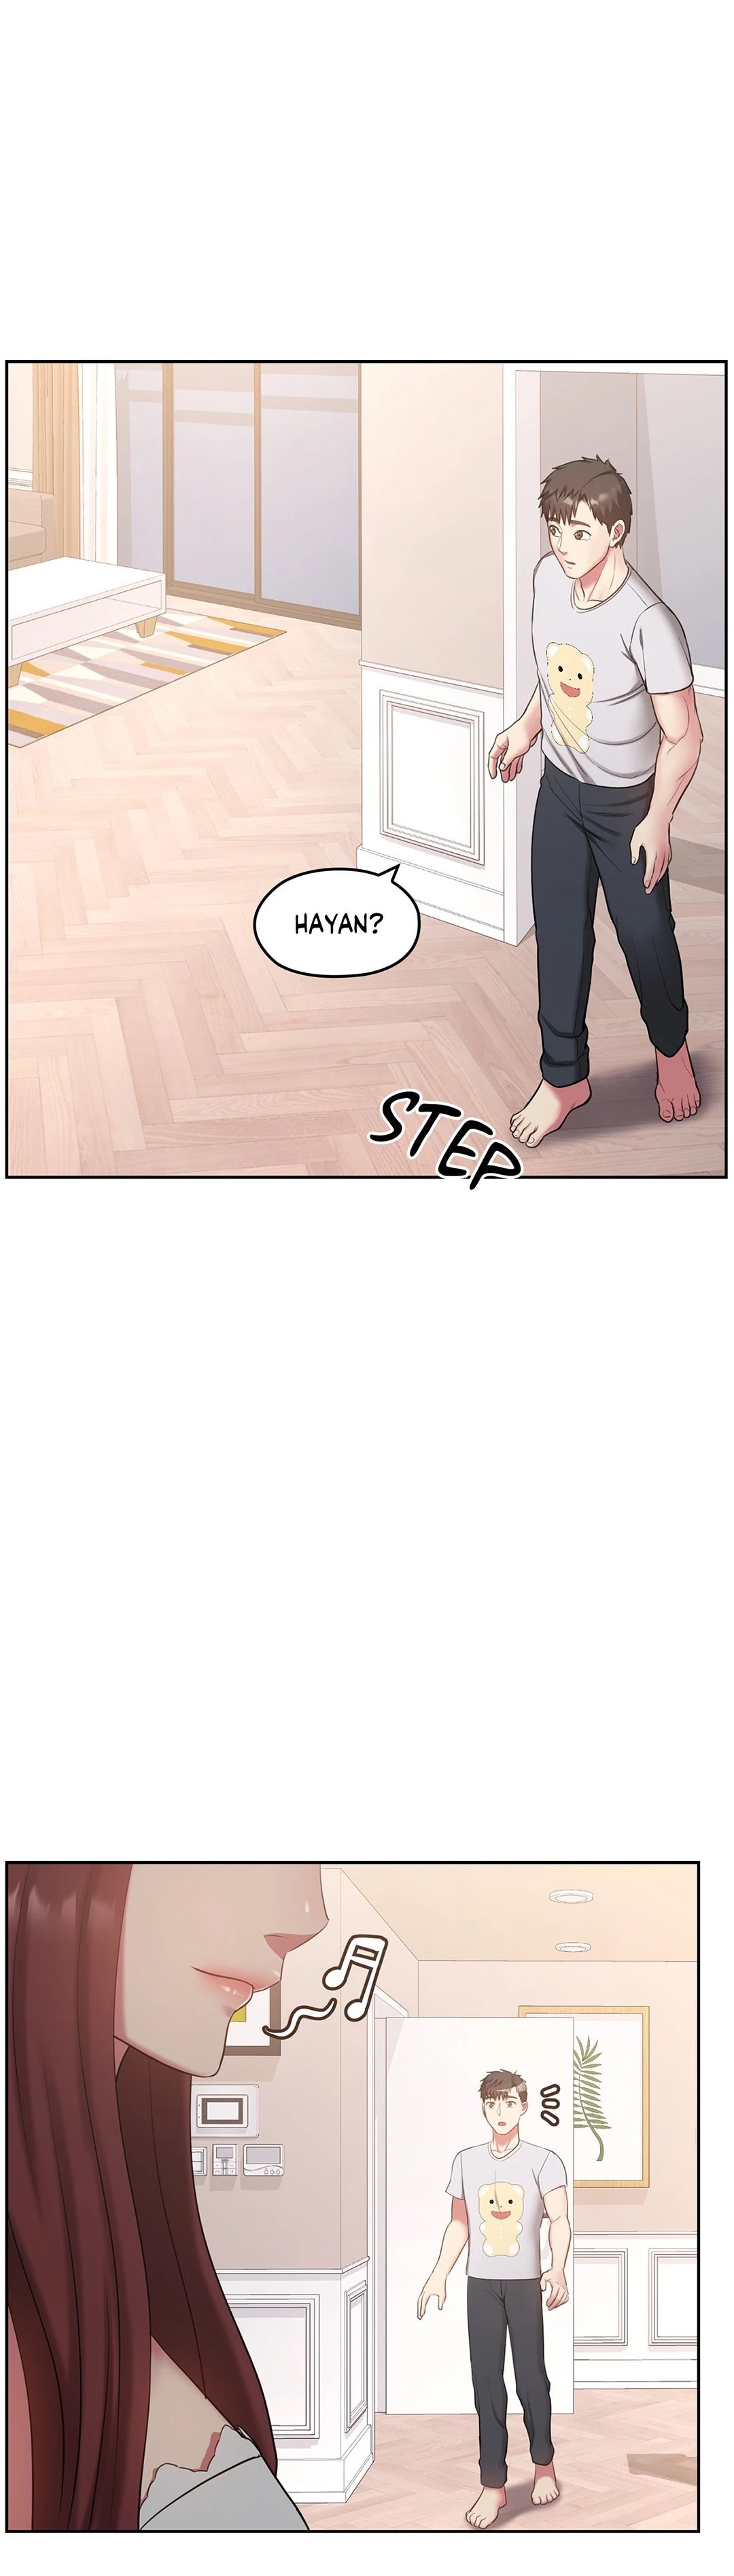 sexual-consulting-chap-32-19